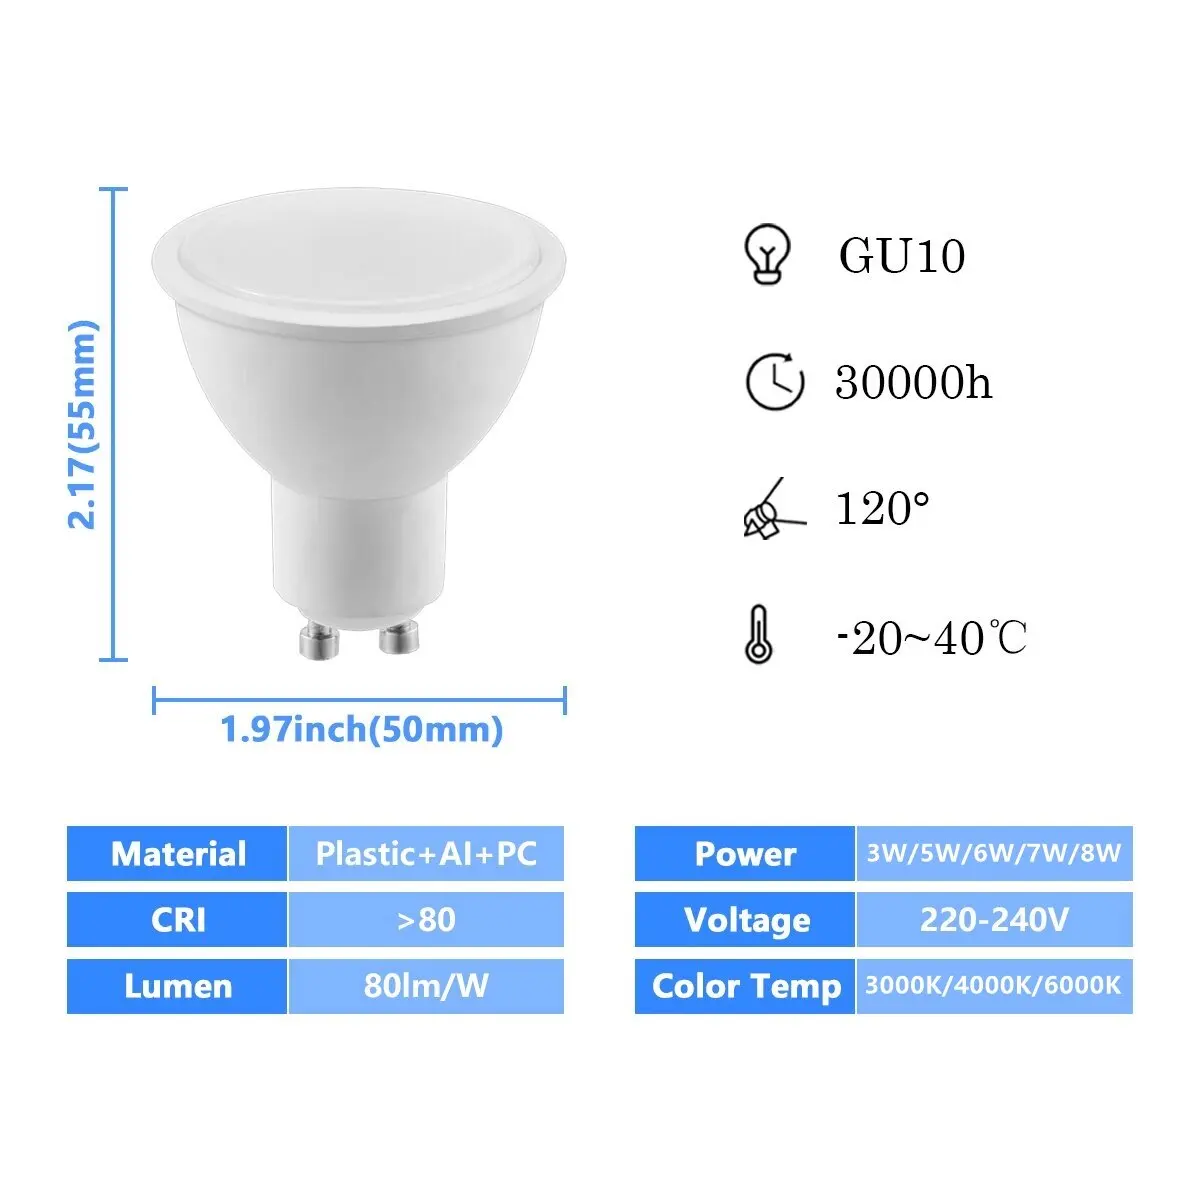 C37 Candle LED Light Bulb Input Voltage 220-240V B22/B15/E14/E27 Base  Available Factory Direct No-Dimmable for Indoor Lighting - China LED Light,  LED Lamp